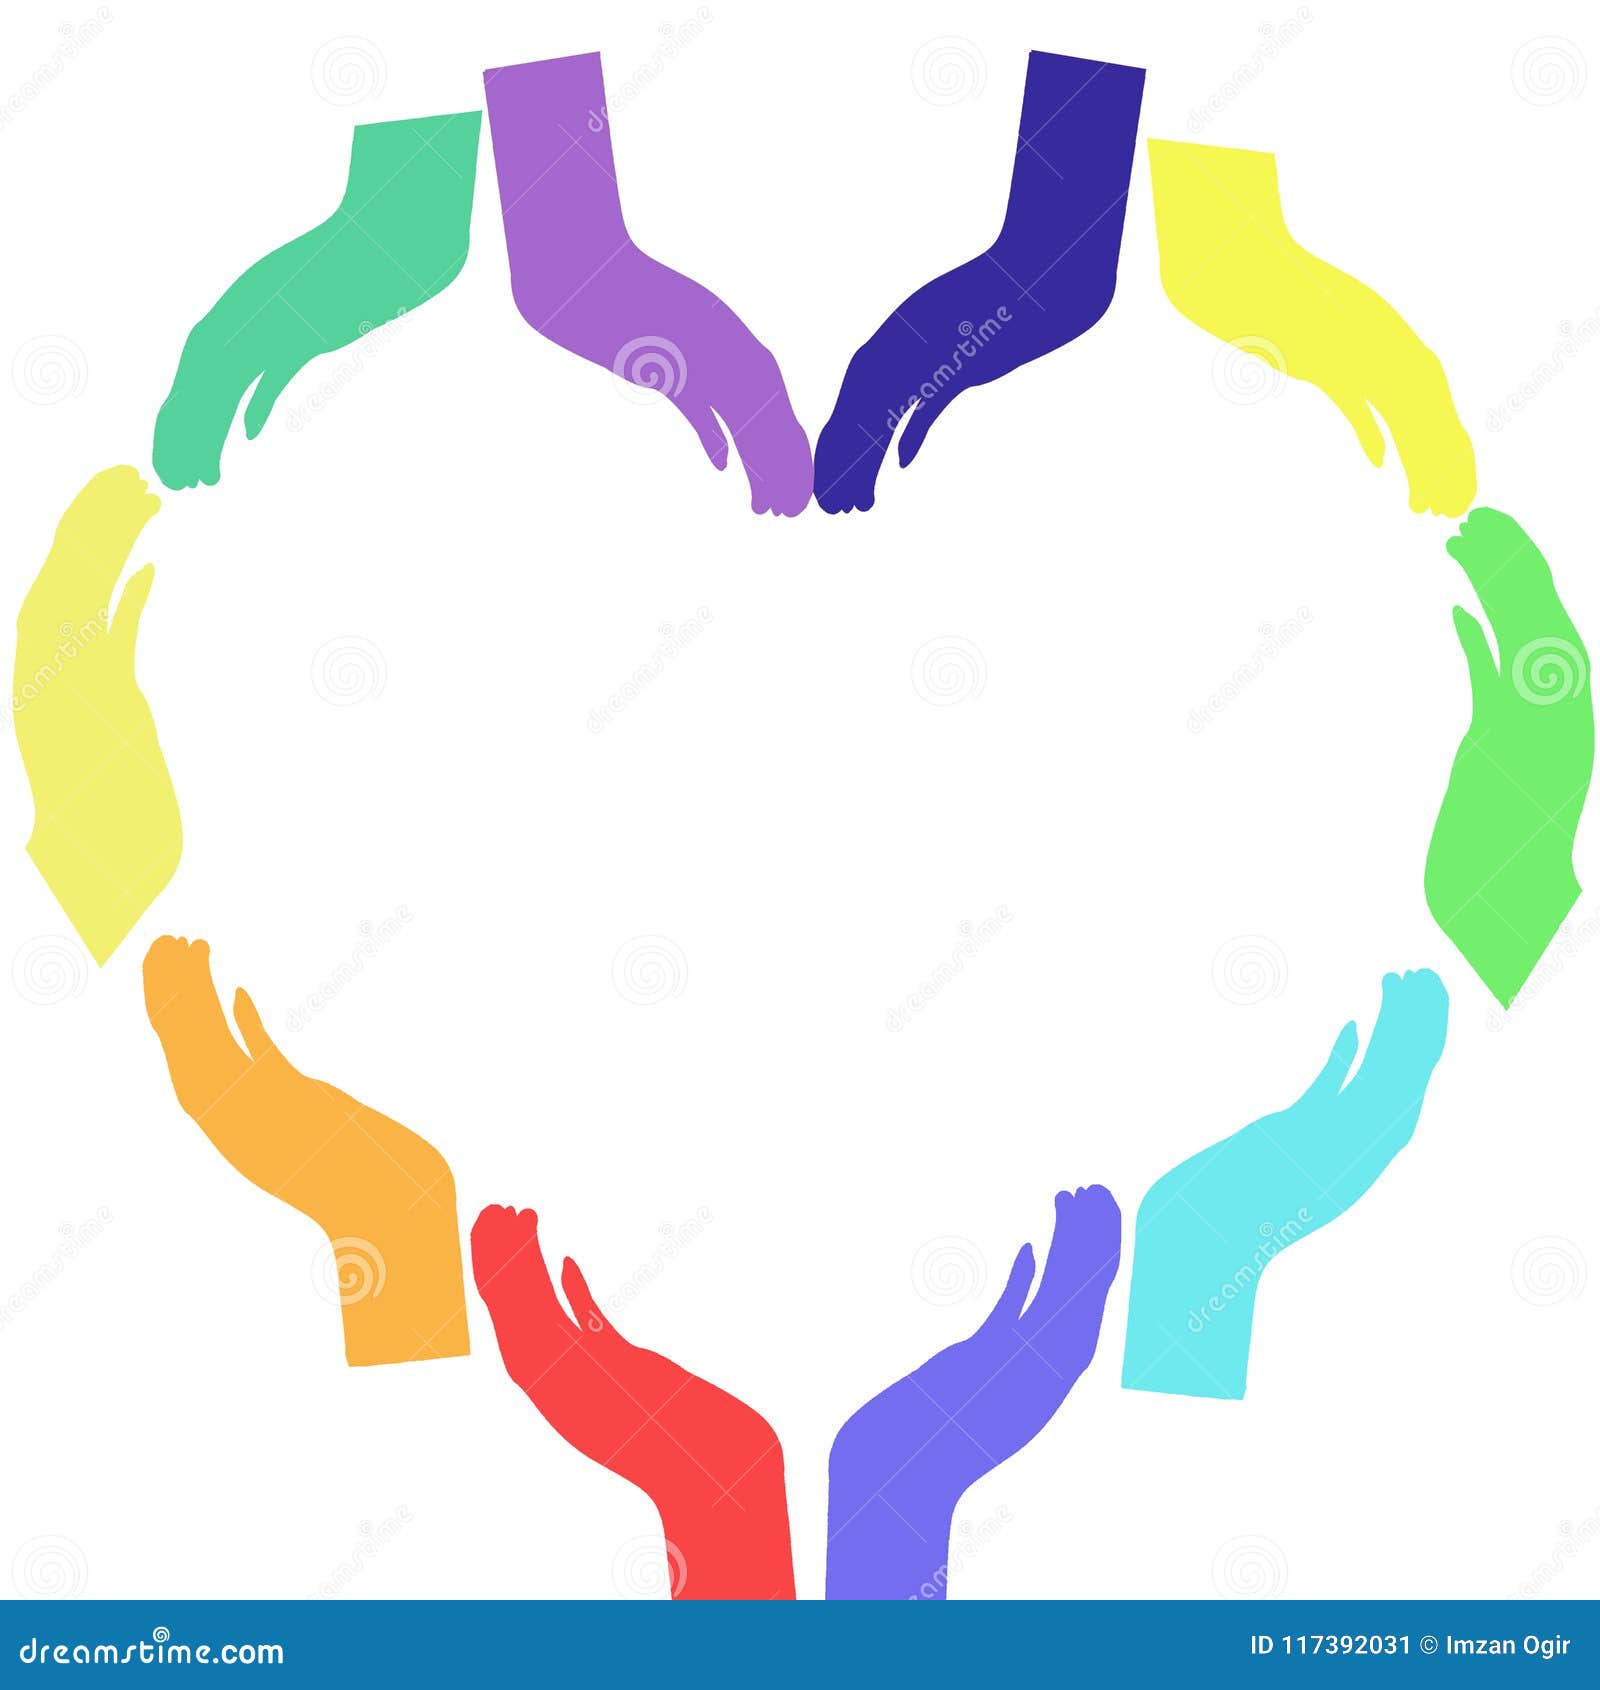 Colorful Rainbow Hands Together Forming a Heart , Concept of Unity and ...